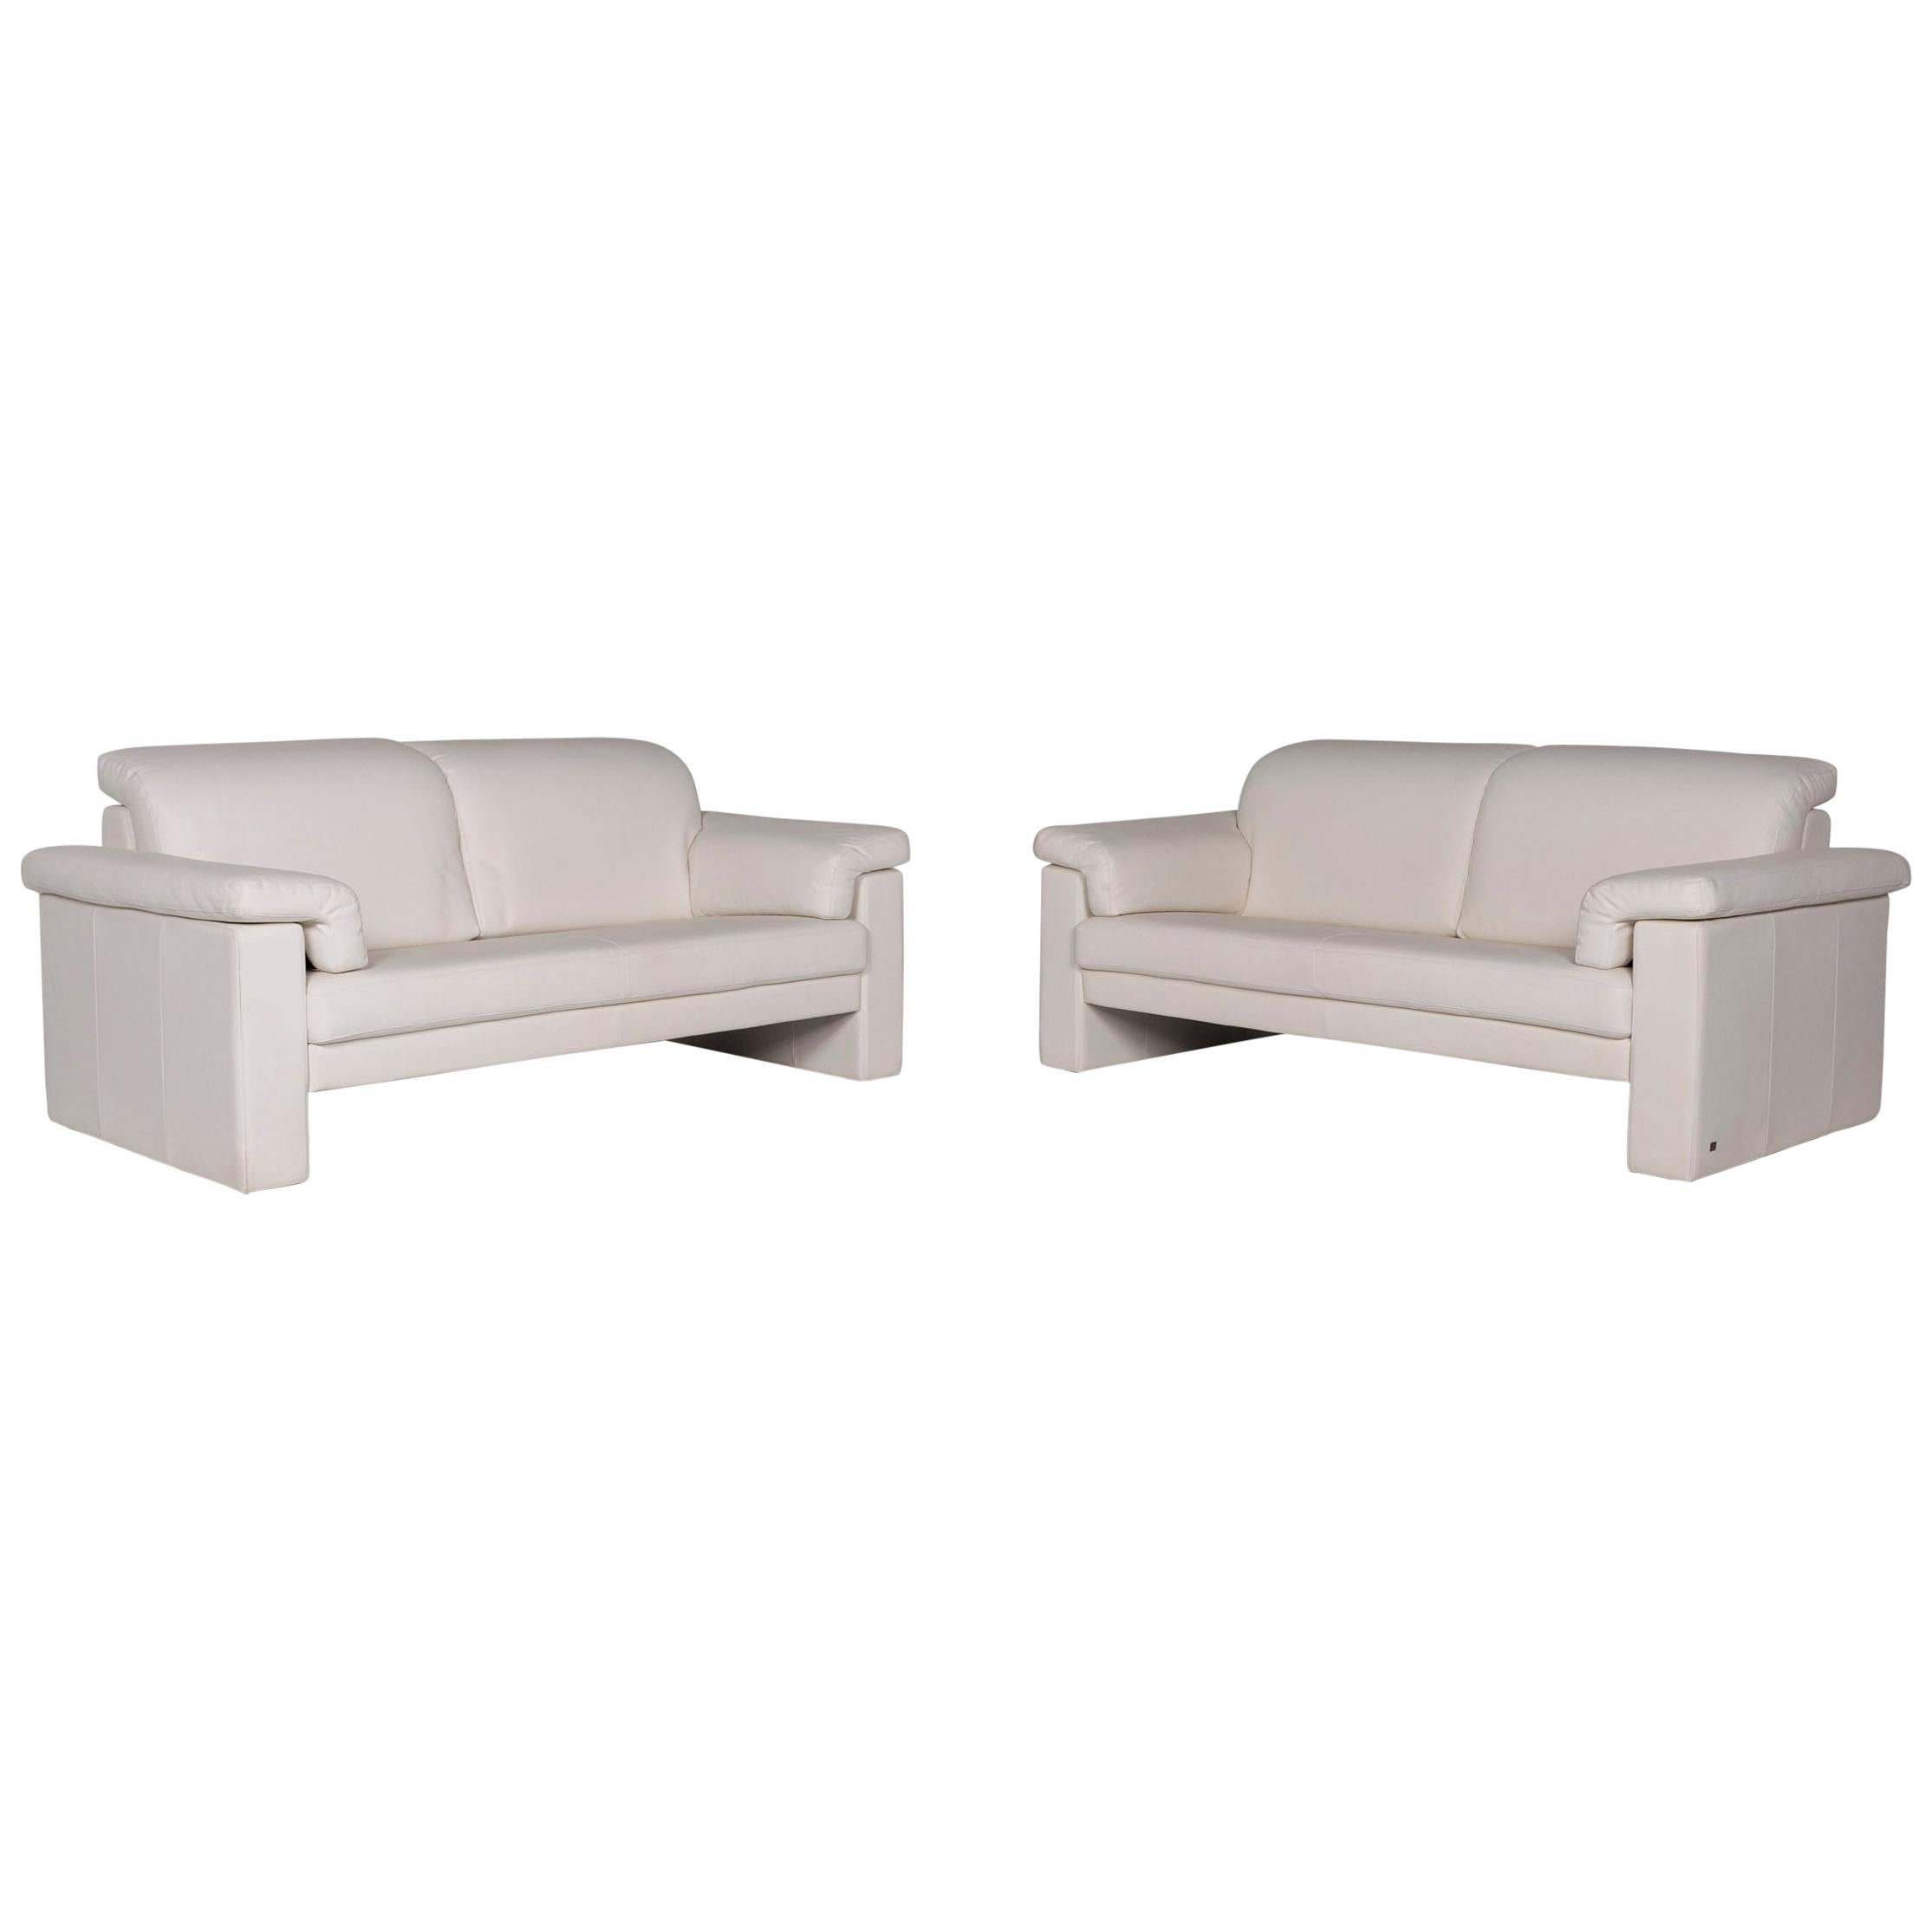 Rolf Benz Leather Sofa Set White 2 Two-Seat Couch For Sale